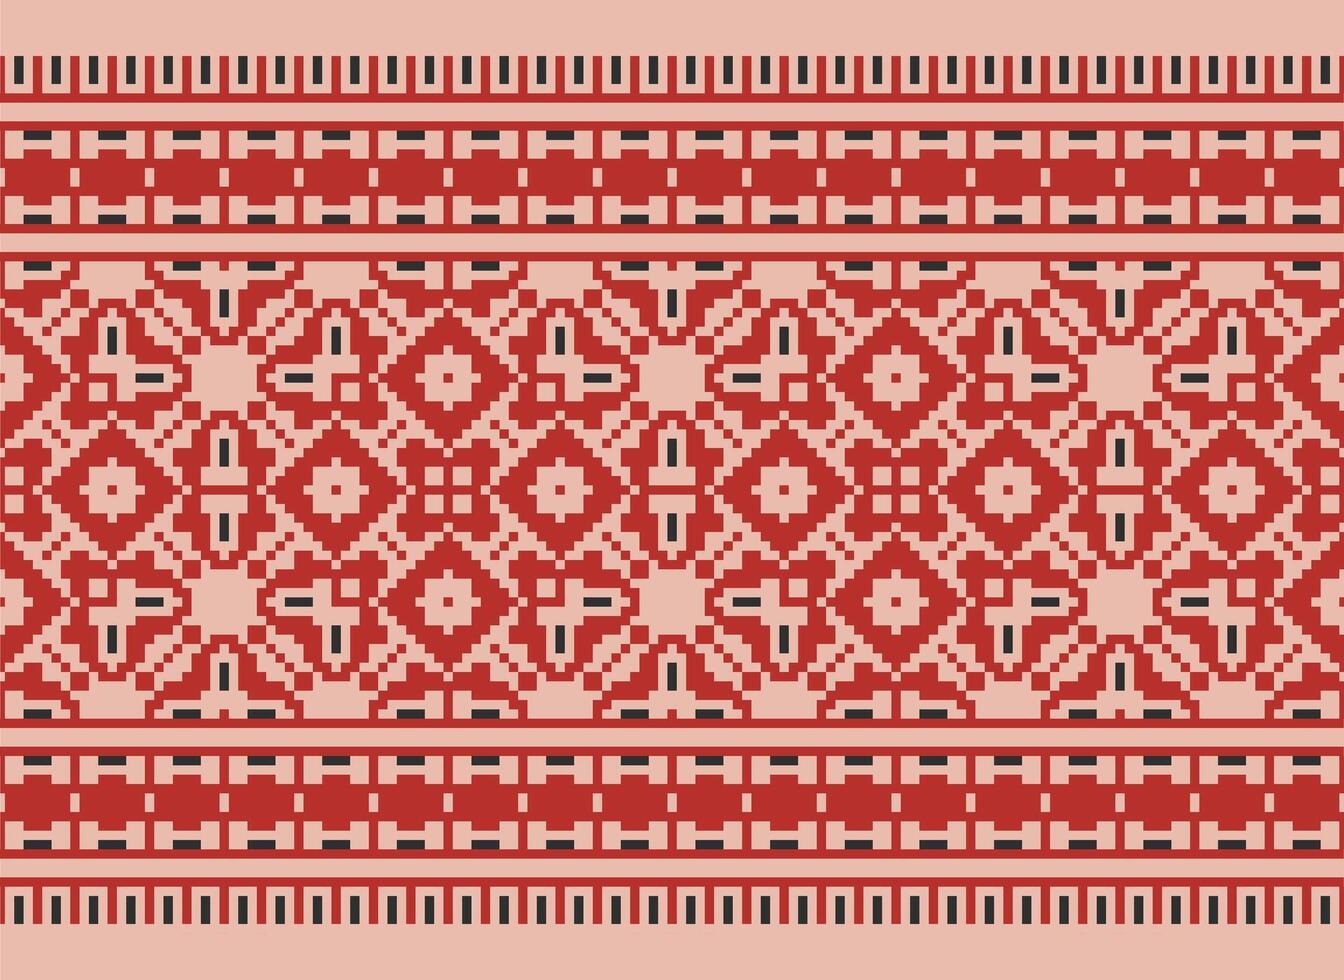 A Beautiful geometric ethnic oriental pattern traditional on white background.Aztec style,embroidery,abstract,vector,illustration.design for texture,fabric,clothing,wrapping,decoration,carpet,print. vector